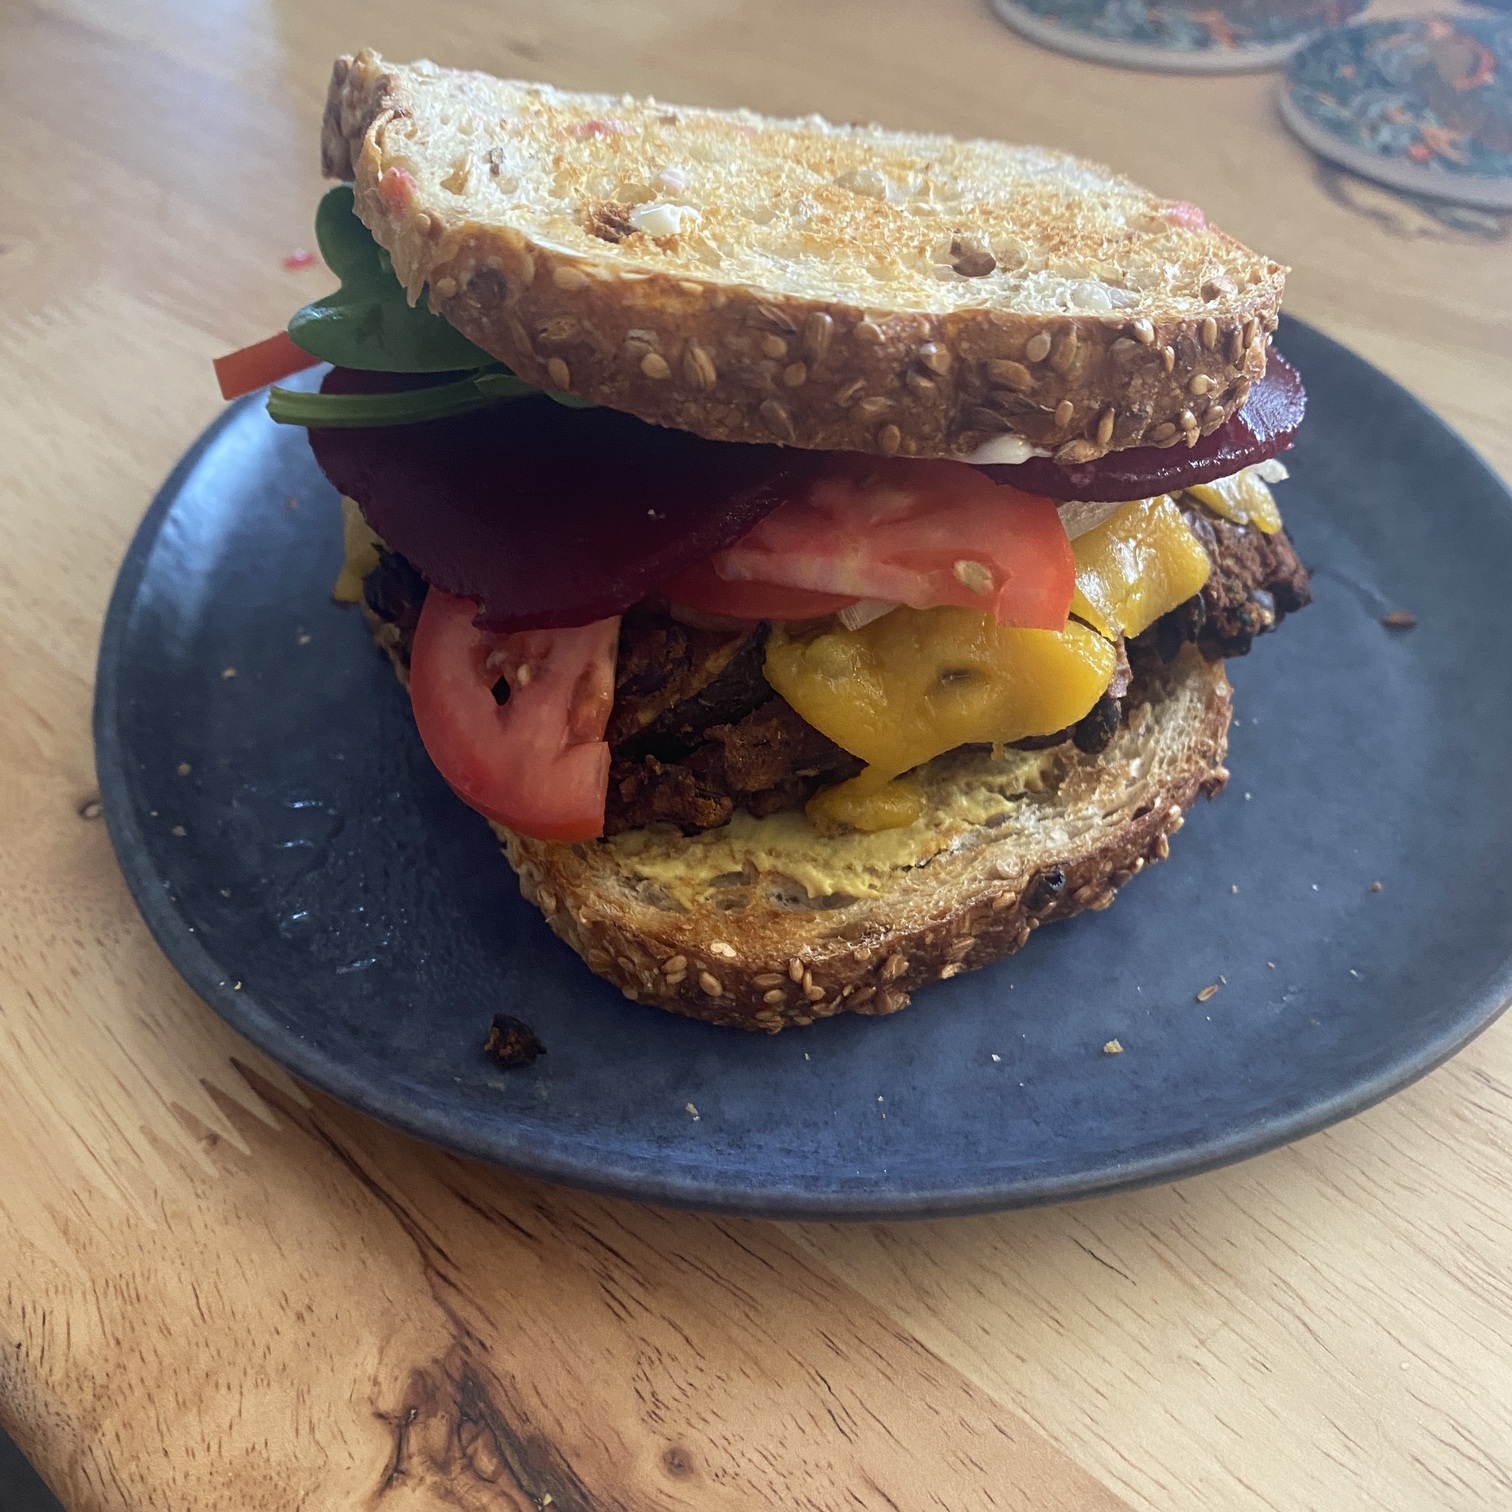 lentil veggie burger recipe - a burger with all the ingredients! Can see tomato, beetroot and the burger patty